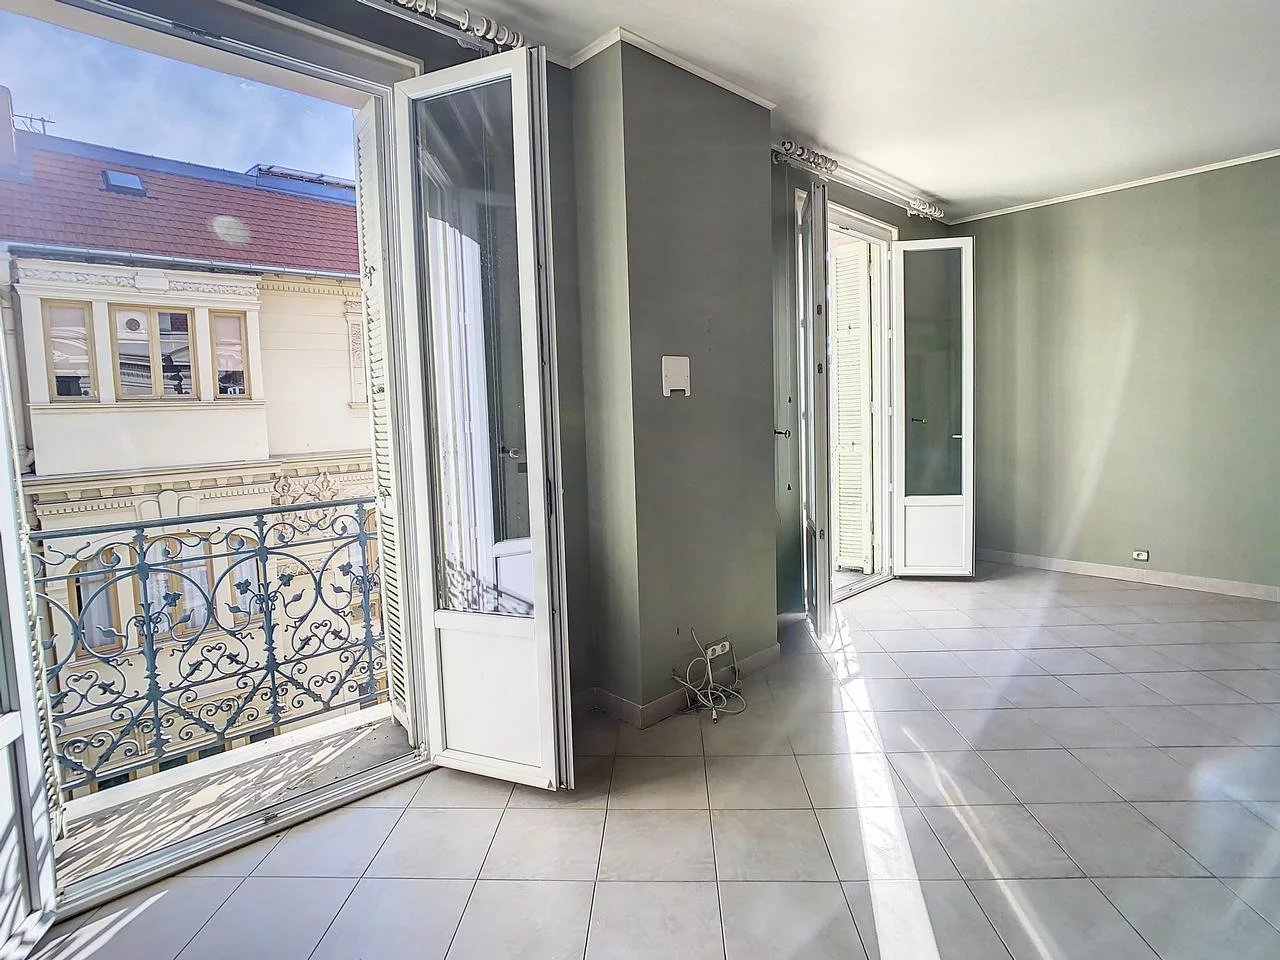 Appartement  1 Rooms 110m2  for sale   690 000 €